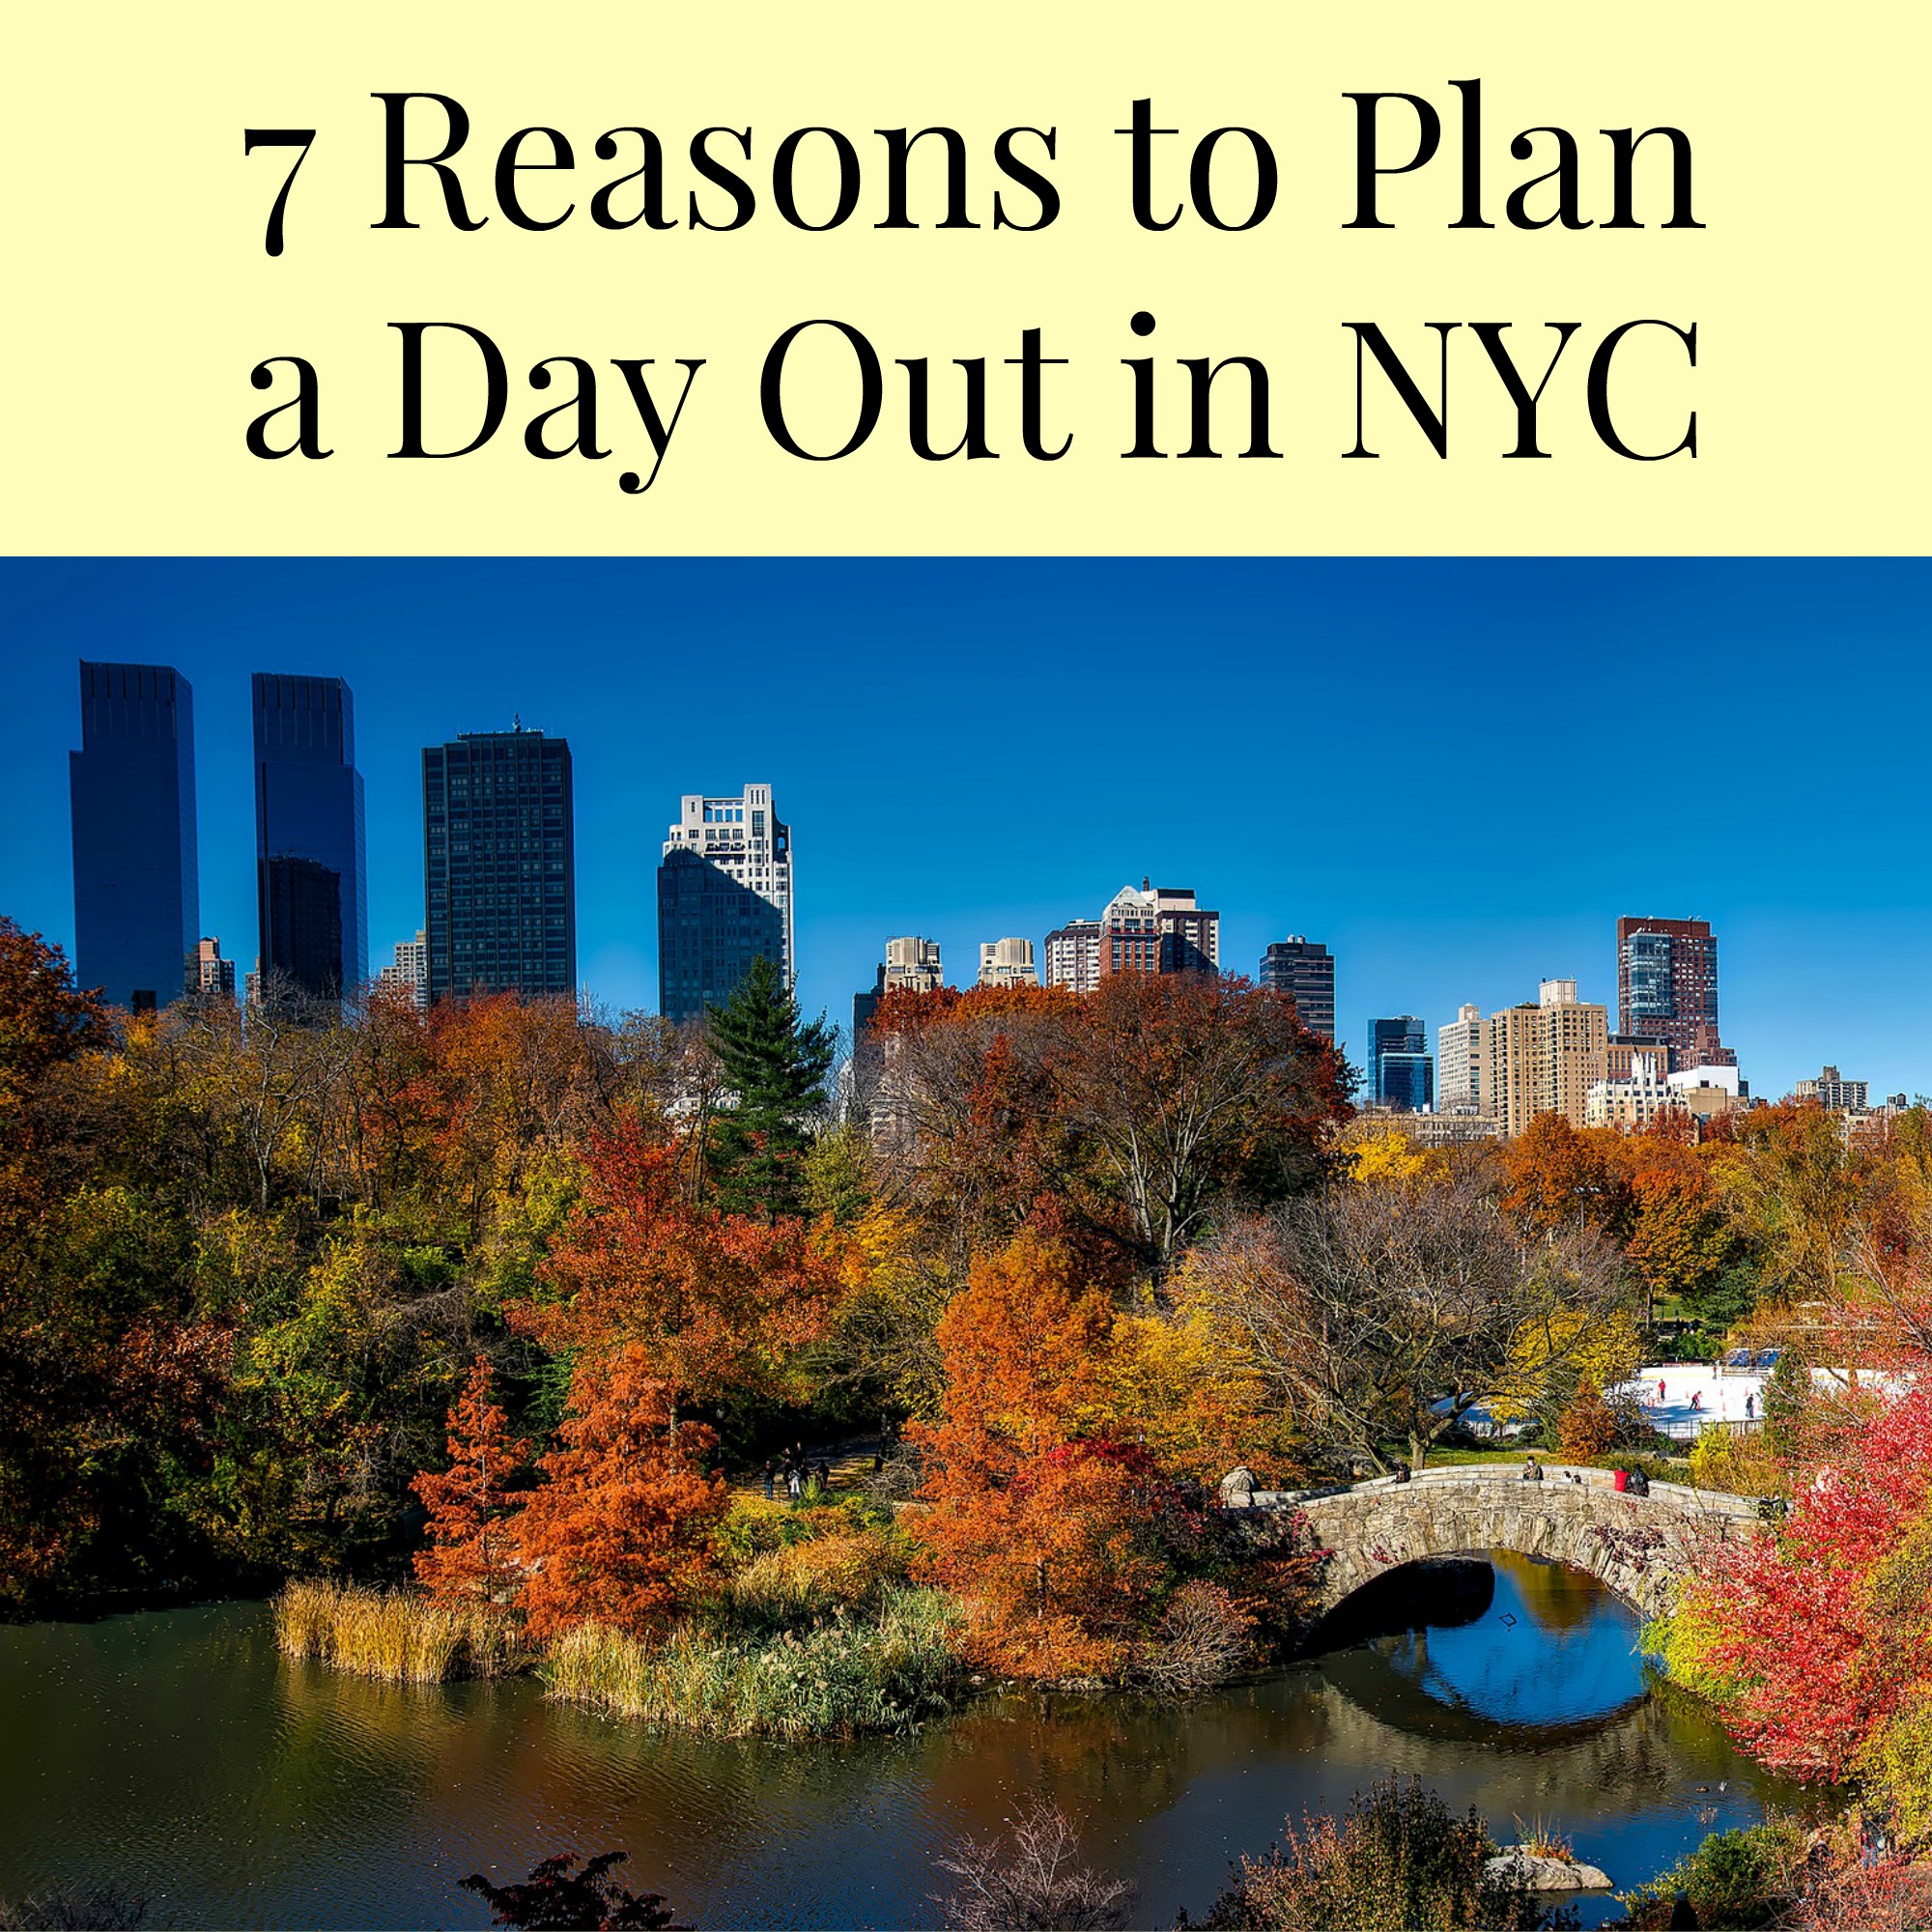 7 Reasons To Plan A Day Out in NYC